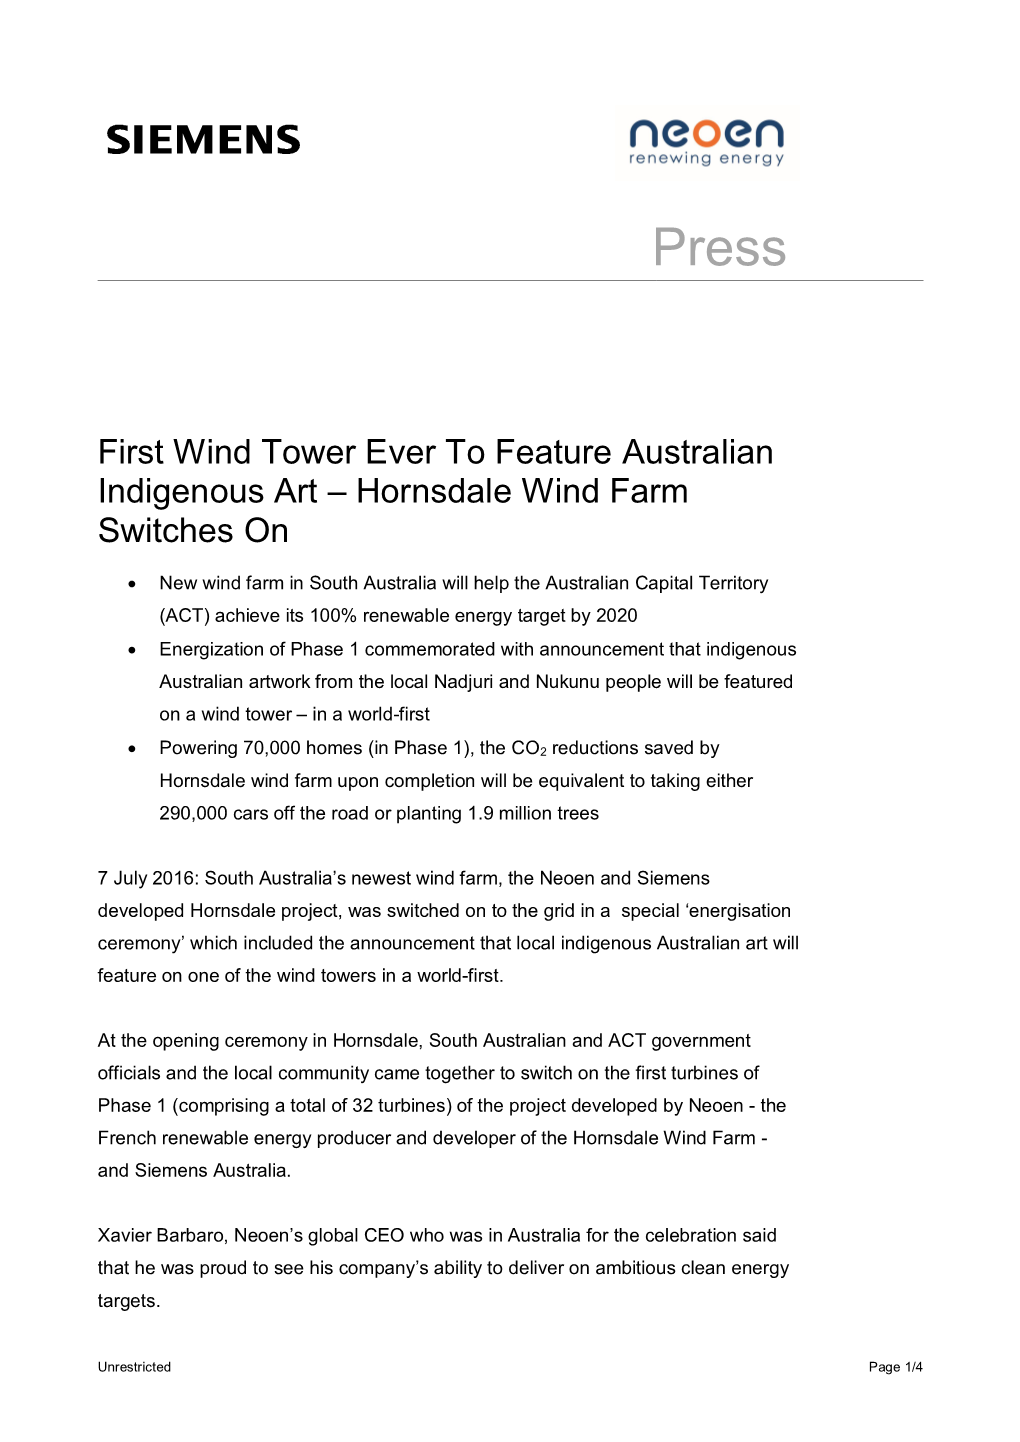 Hornsdale Wind Farm Switches On